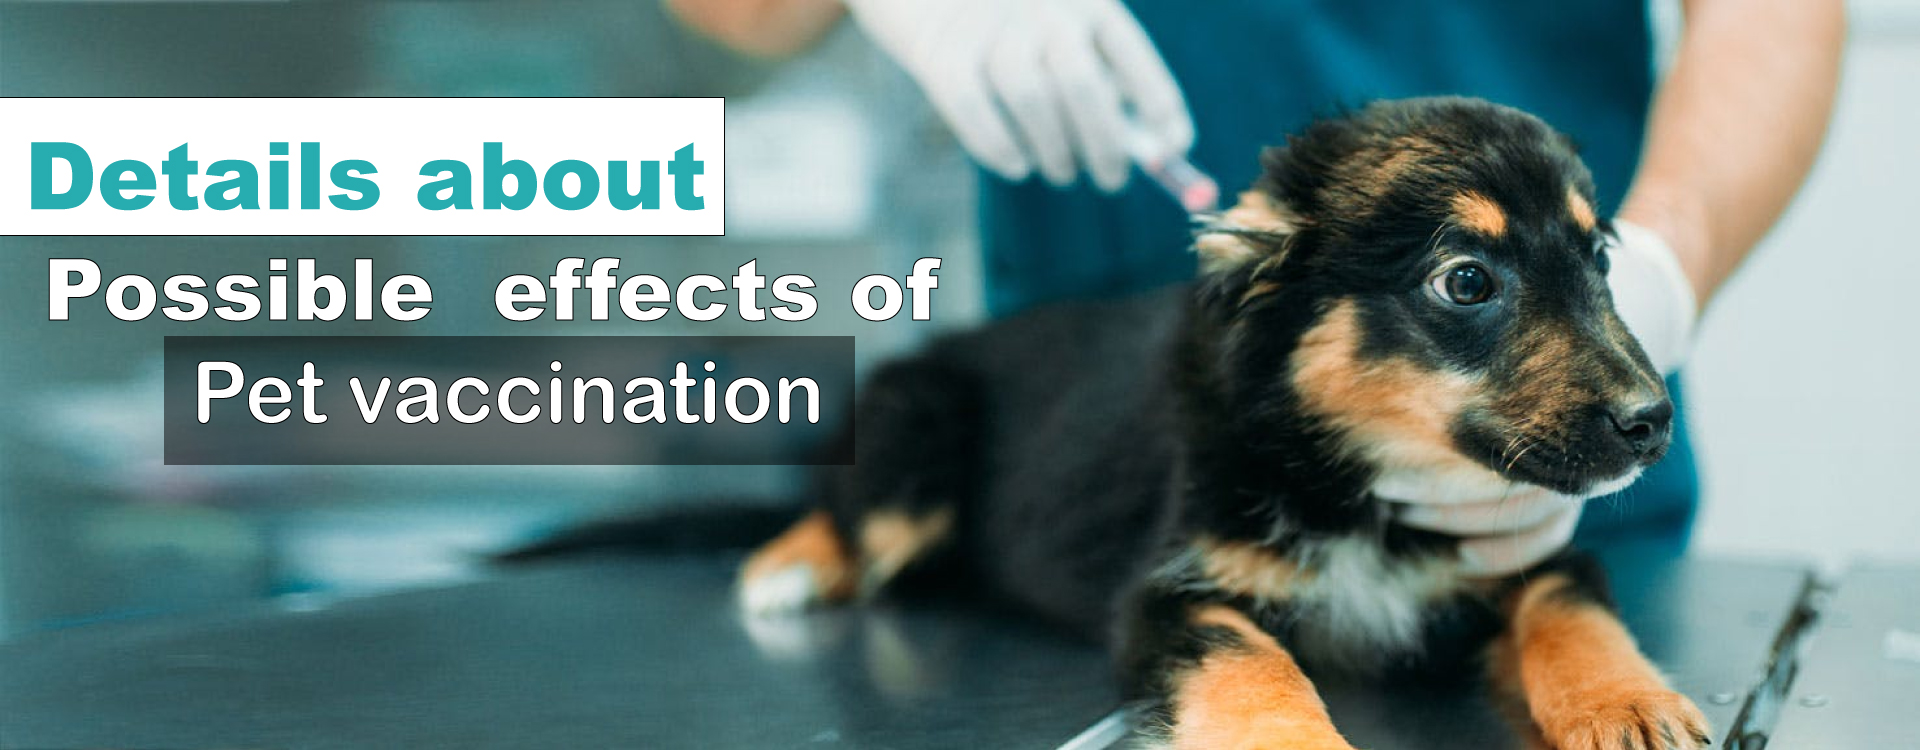 Details-about-Possible-effects-of-Pet-vaccination